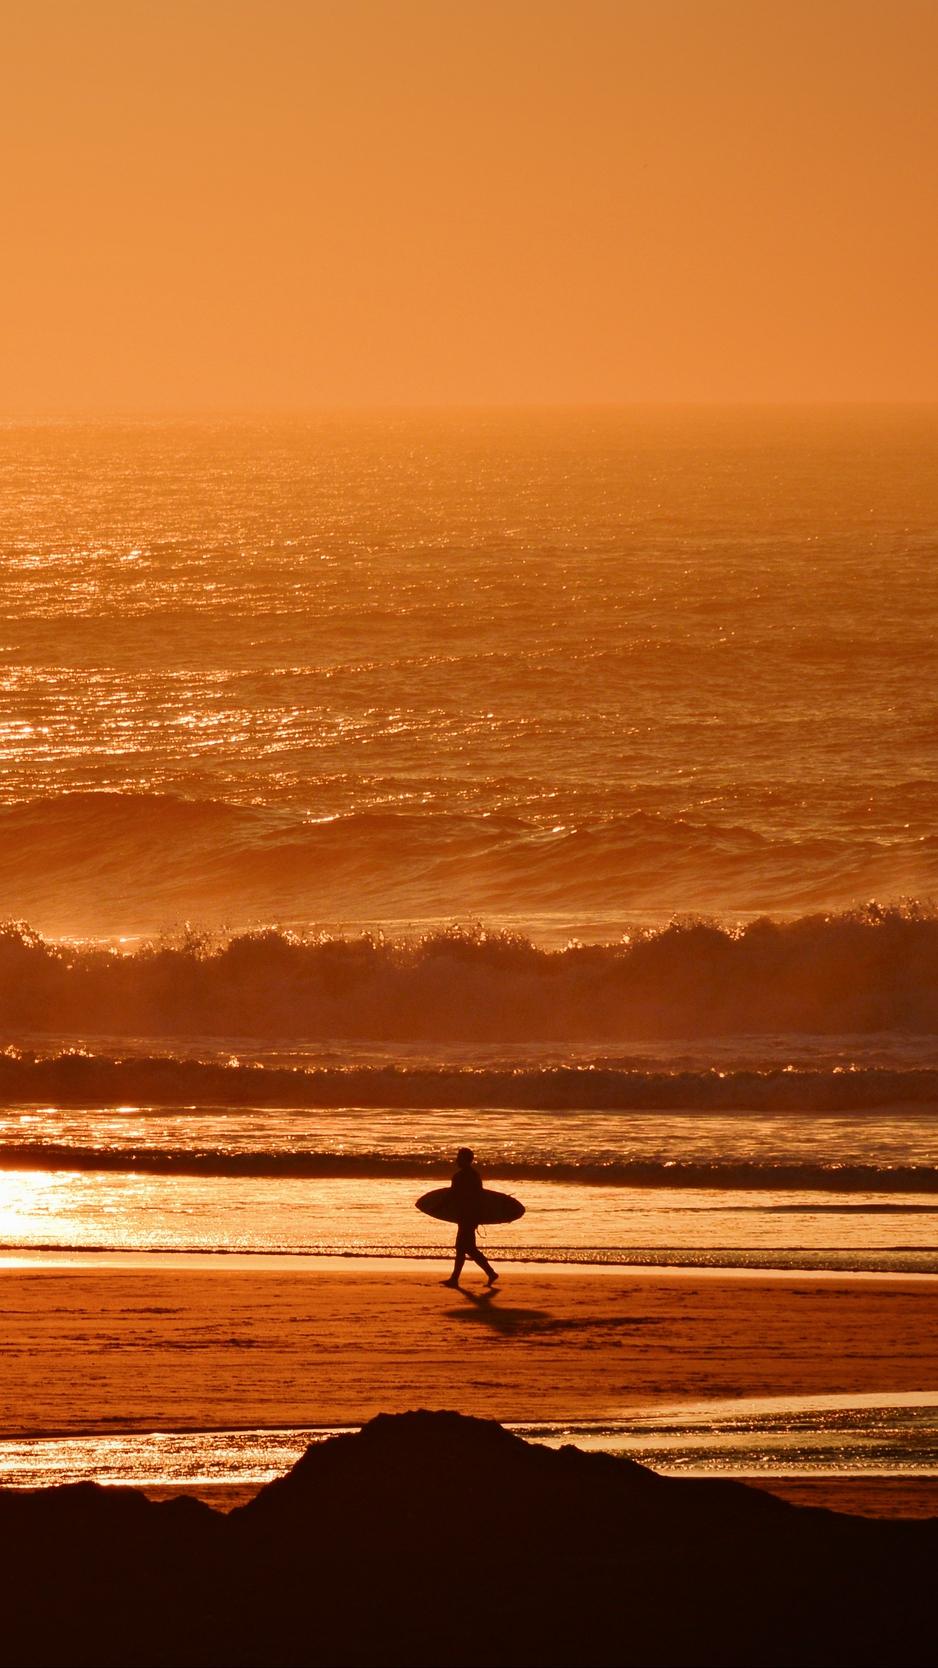 A surfer walking on the beach carrying his surfboard during sunset - Surf